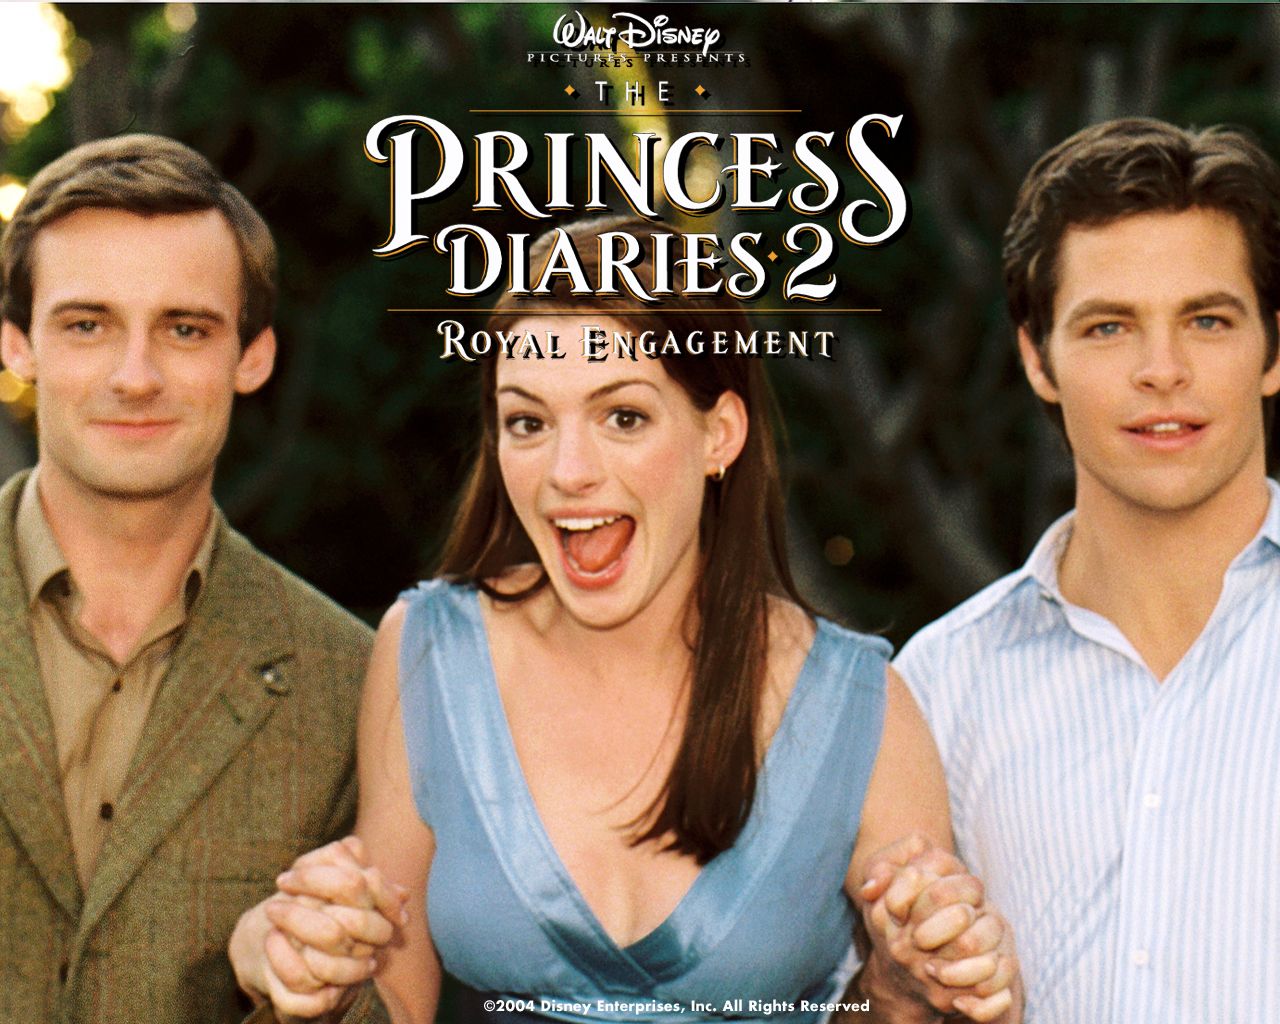 Anne Hathaway in The Princess Diaries 2- Royal Engagement Wallpaper 1280 picture, Anne Hathaway in The Princess Diaries 2- Royal Engagement Wallpaper 1280 image, Anne Hathaway in The Princess Diaries 2- Royal Engagement Wallpaper 1280 wallpaper